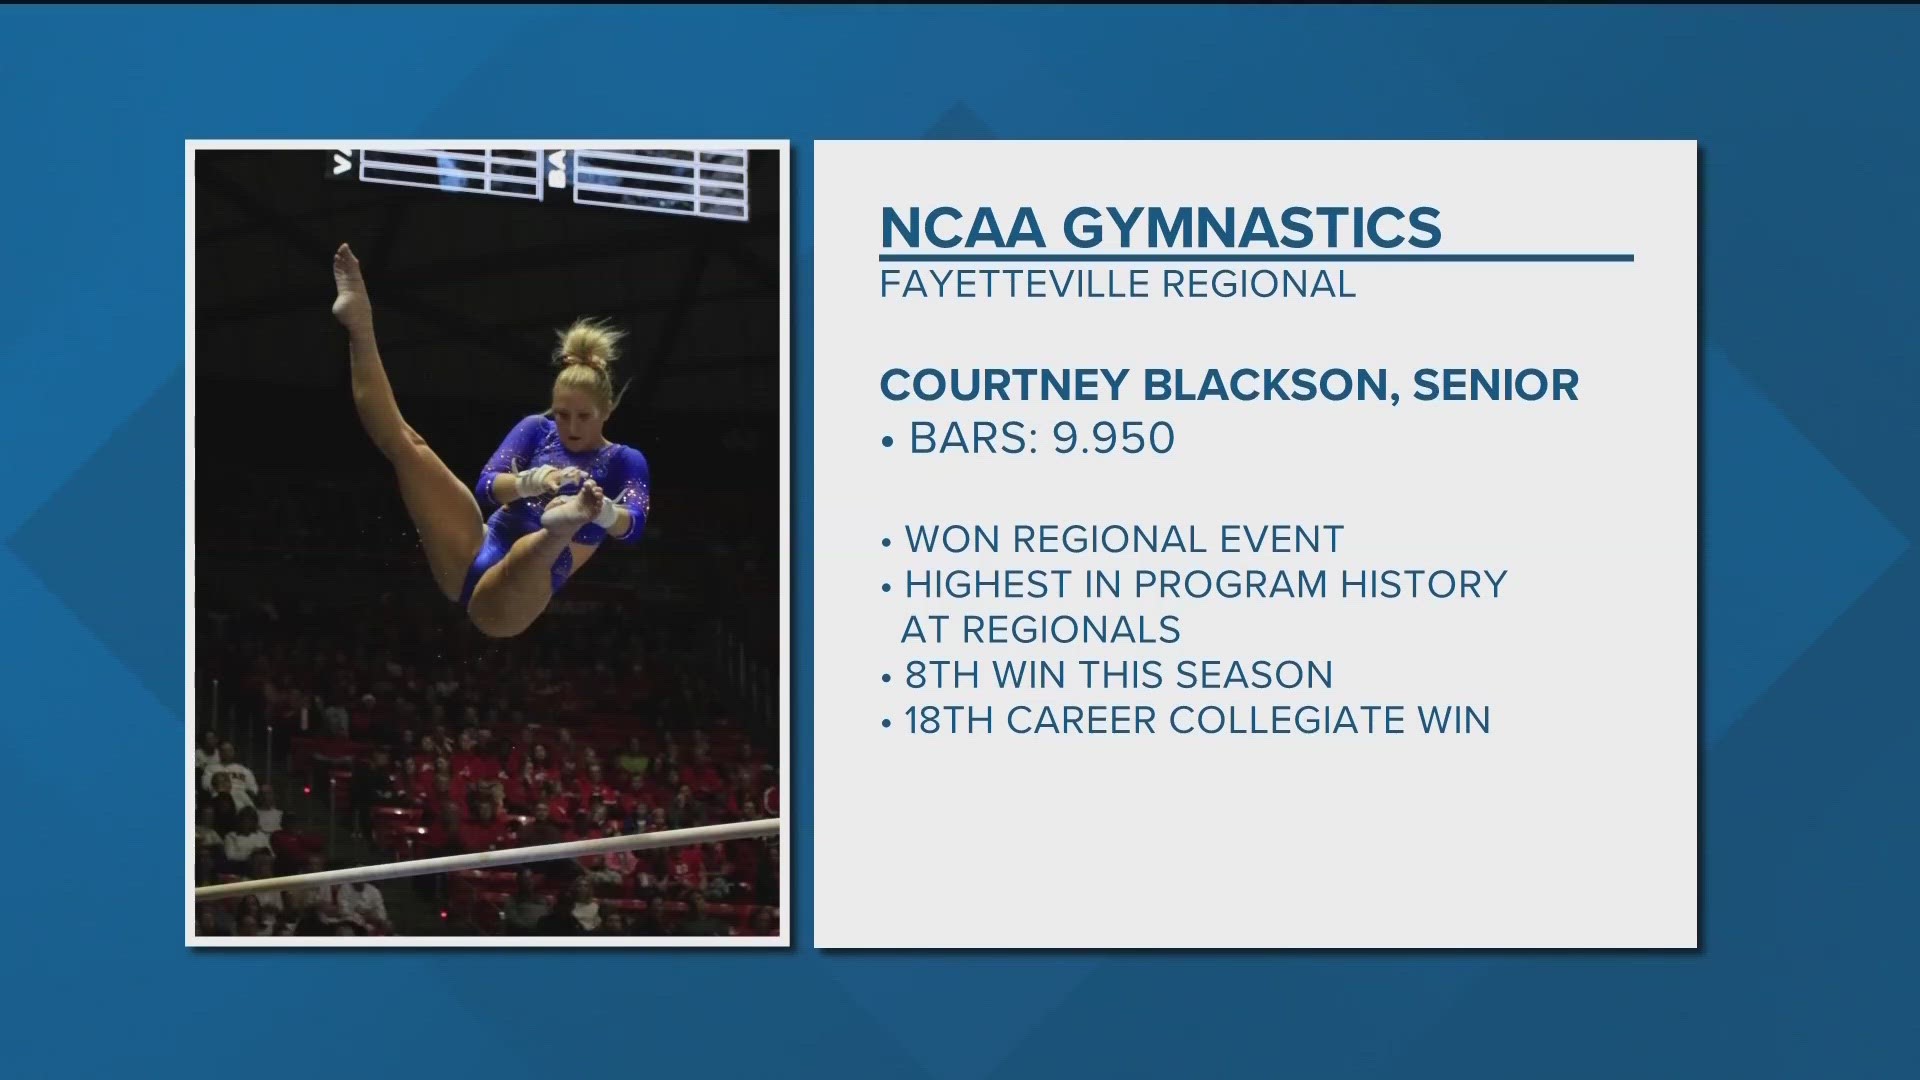 Blackson is the first Bronco to ever win regional titles in back-to-back seasons. The senior scored a 9.950 on bars, tying the Boise State record at a regional.